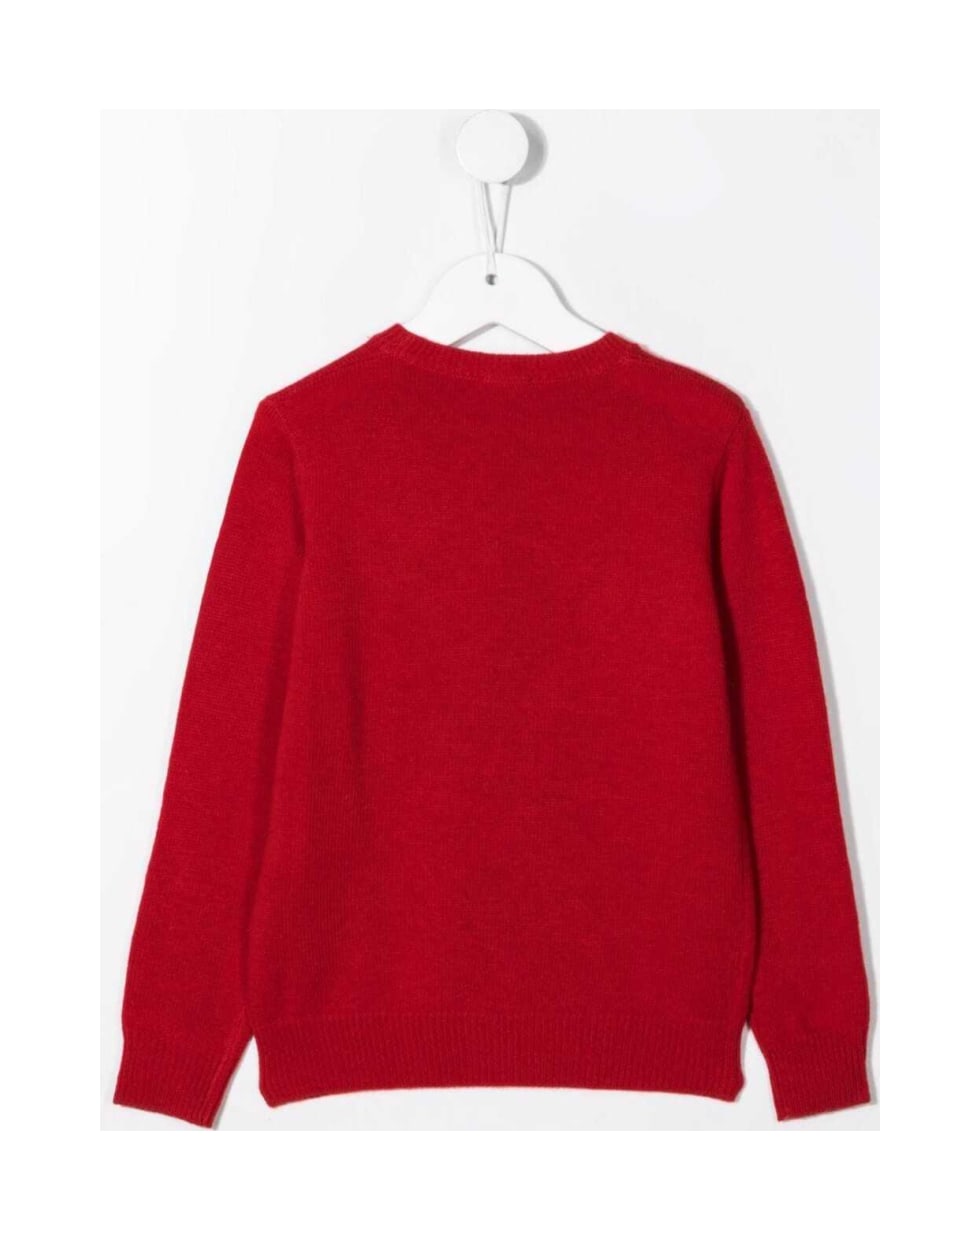 Il Gufo Red Wool Sweater With Christmas Reindeer Print - Red